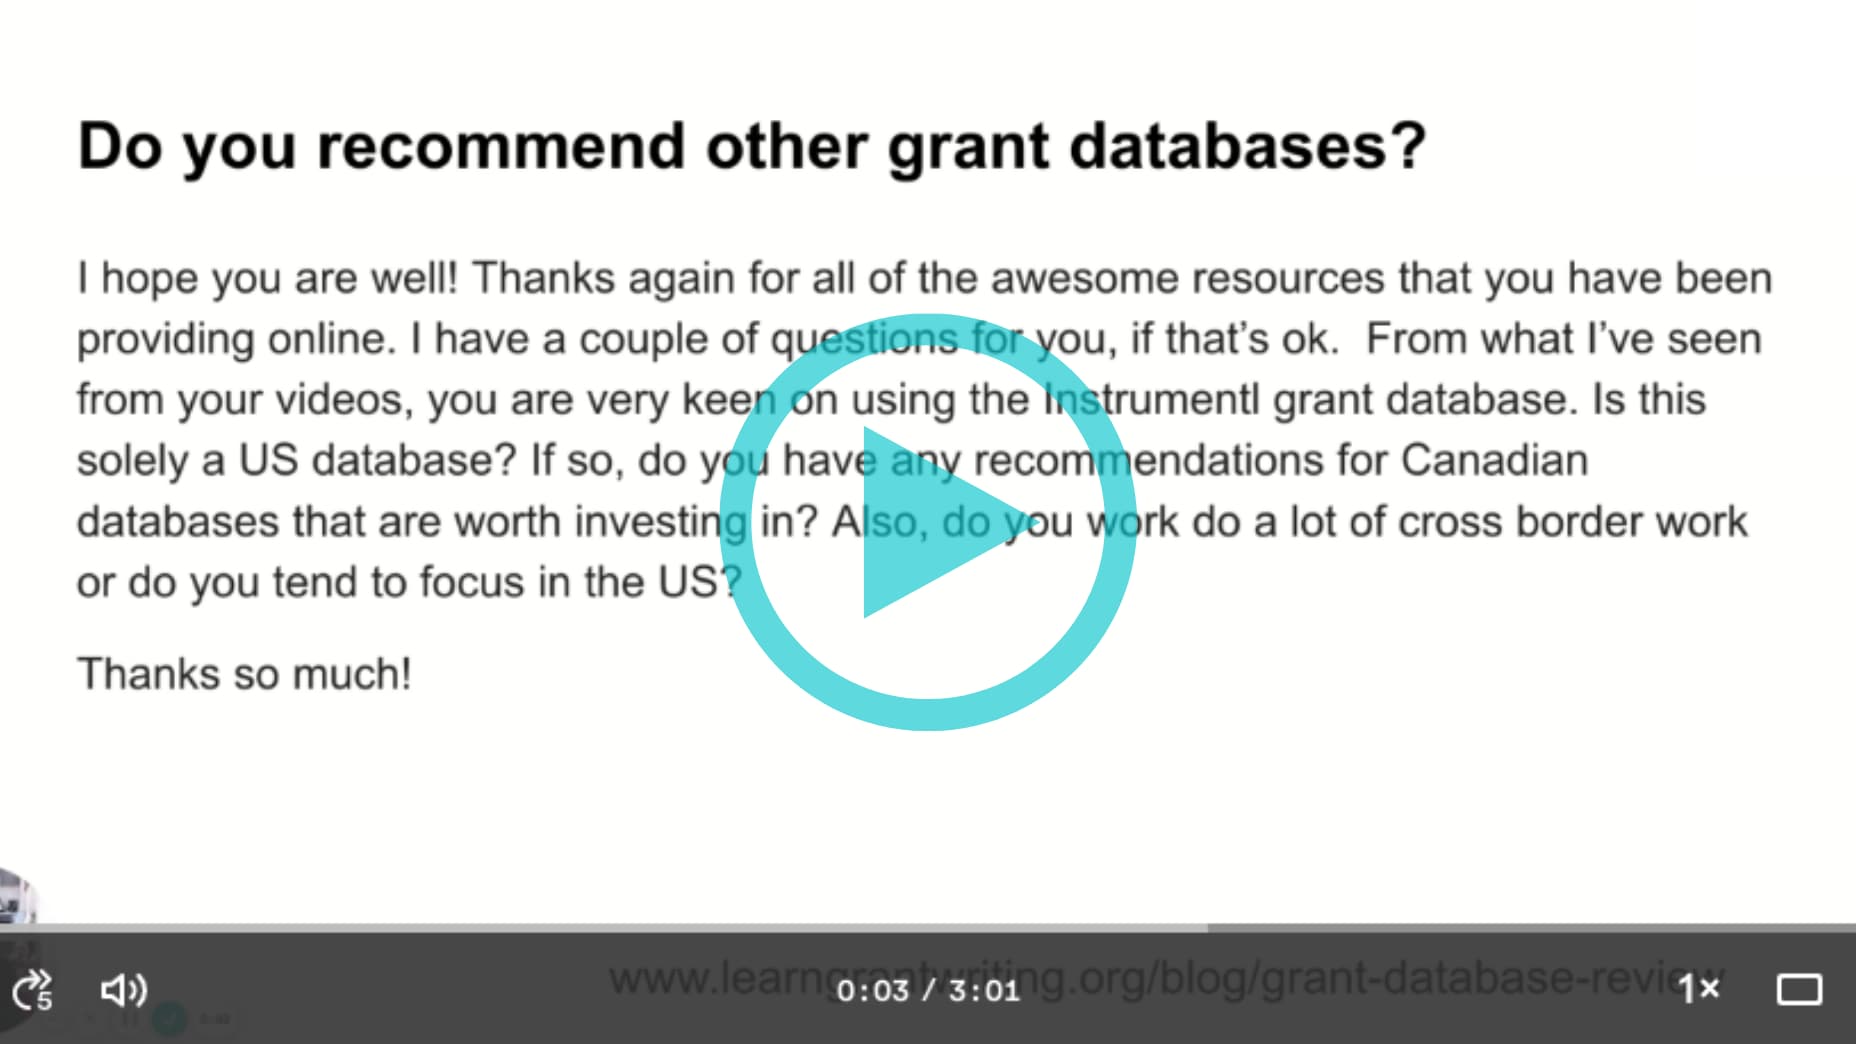 What grant databases we recommend